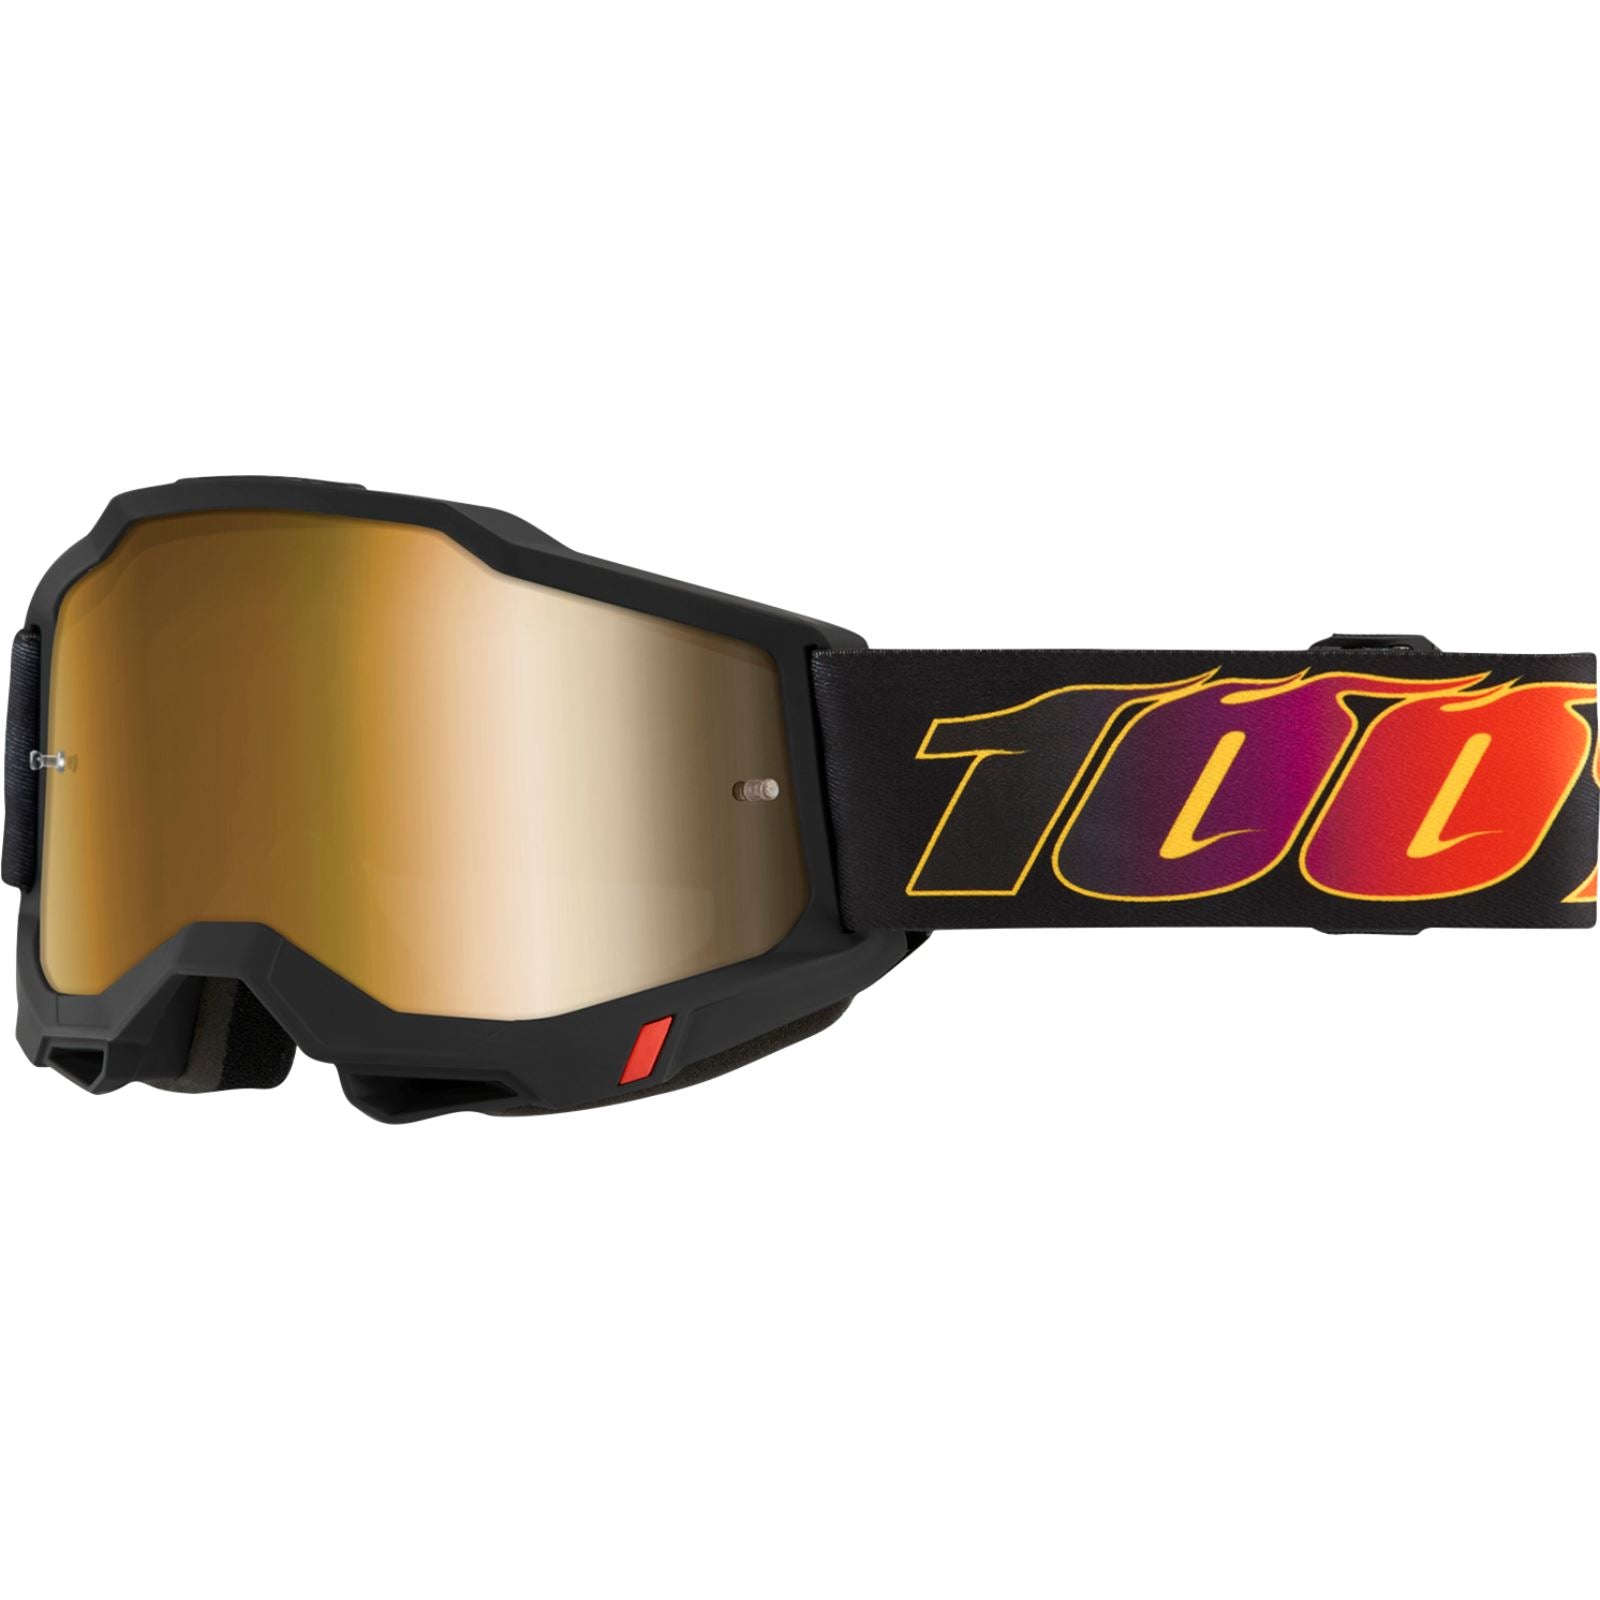 Black with Fire 100% logo and gold lens, Mountain Bike Goggles